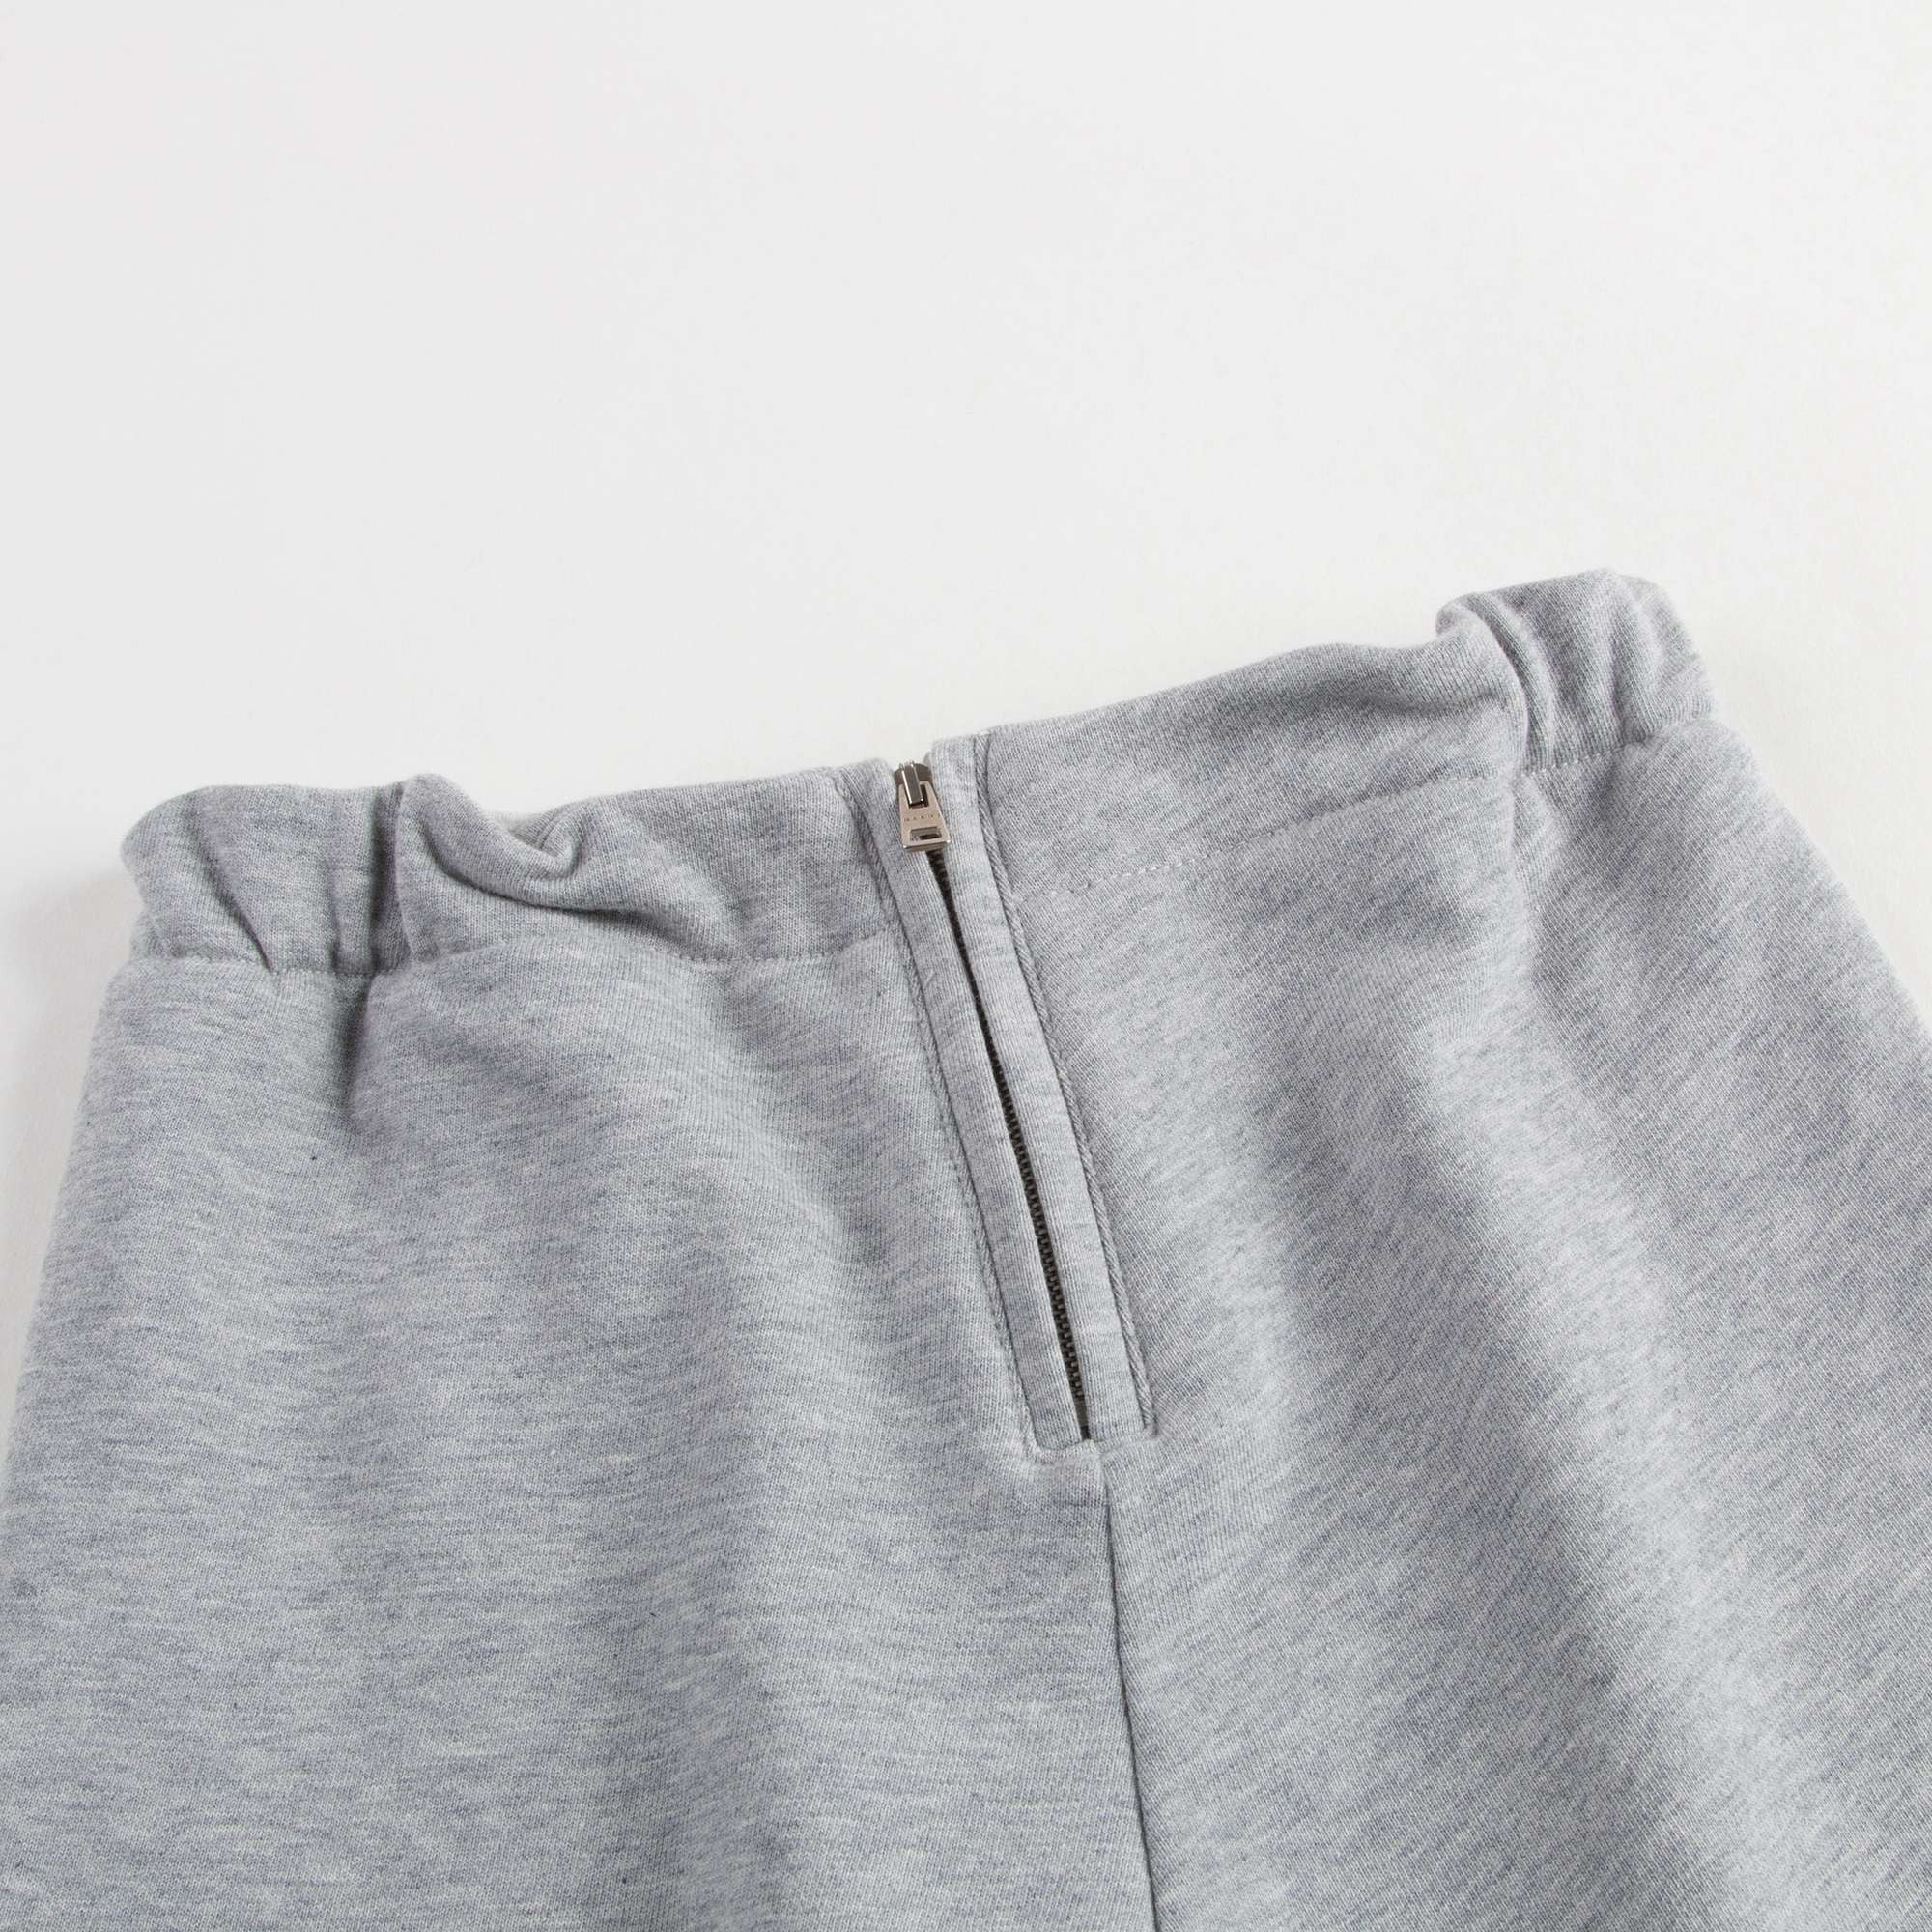 Girls Grey Cotton Trousers